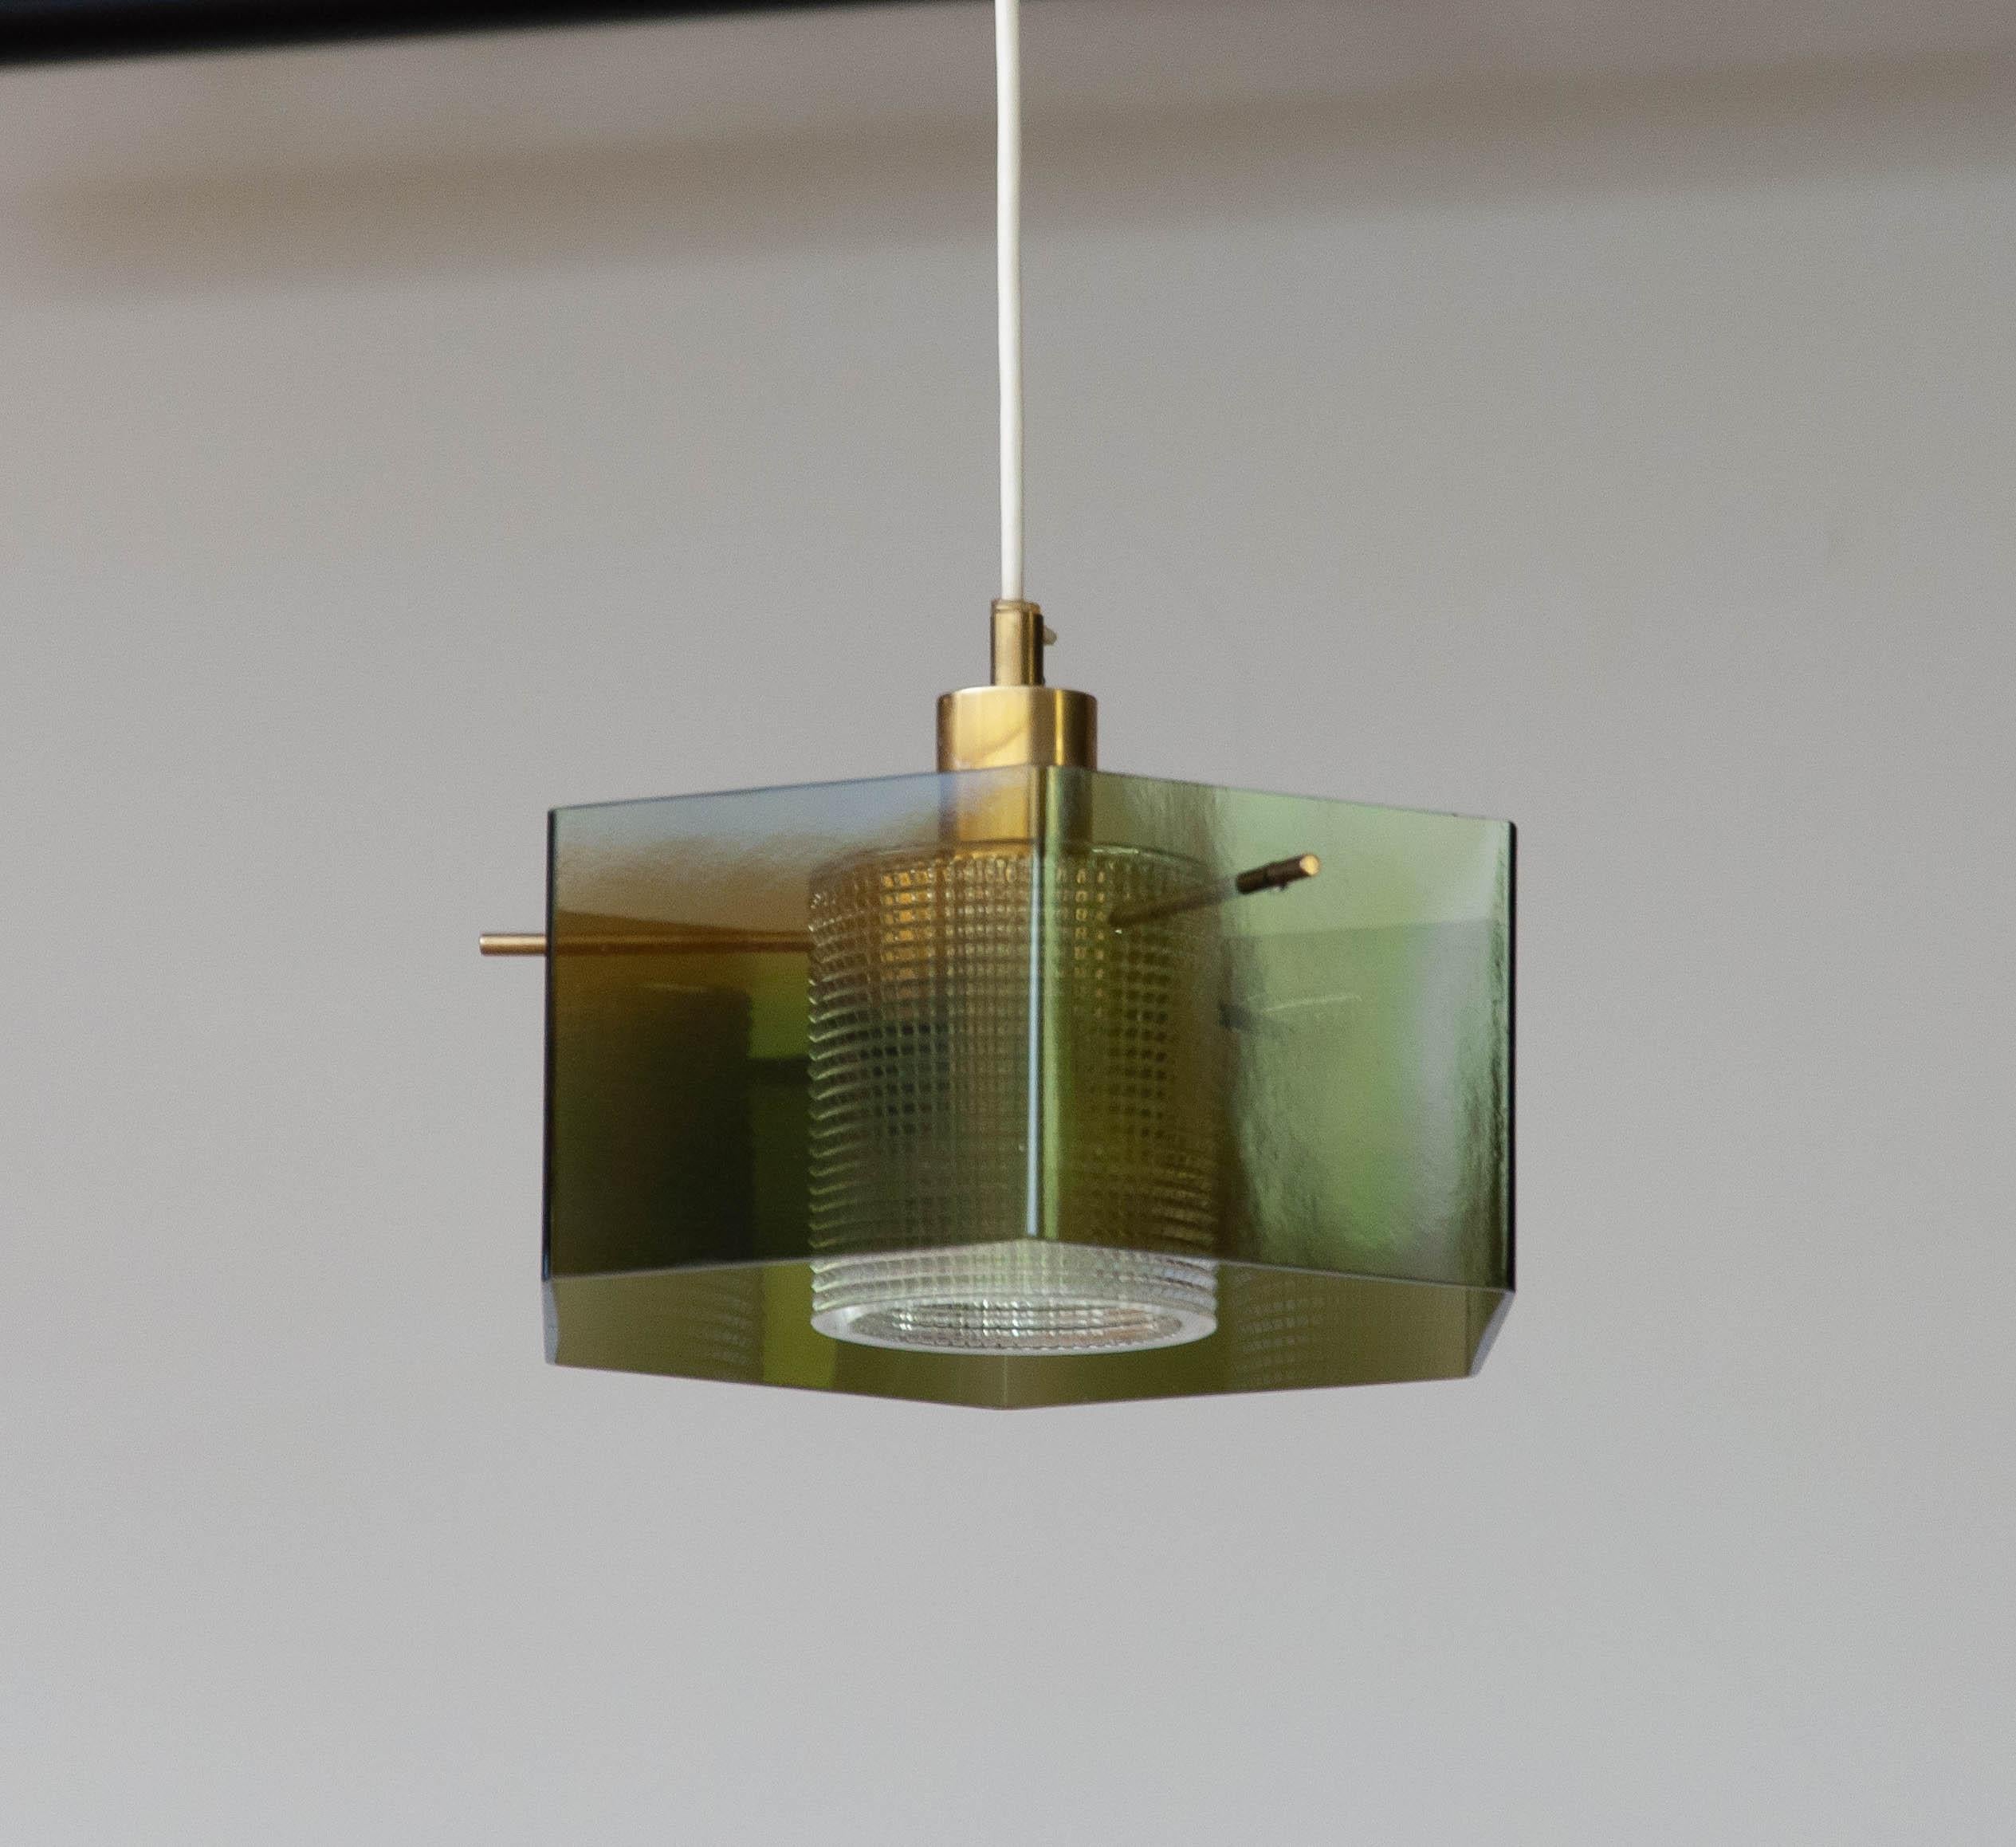 Great art-glass pendant designed by Carl Fagerlund for Orrefors in Sweden in the 1960's.
Inside the green hexagonal outer shade is an heavy clear art glass cilinder.

Both glass shades are hanging on three brass bars who are mounted to a brass